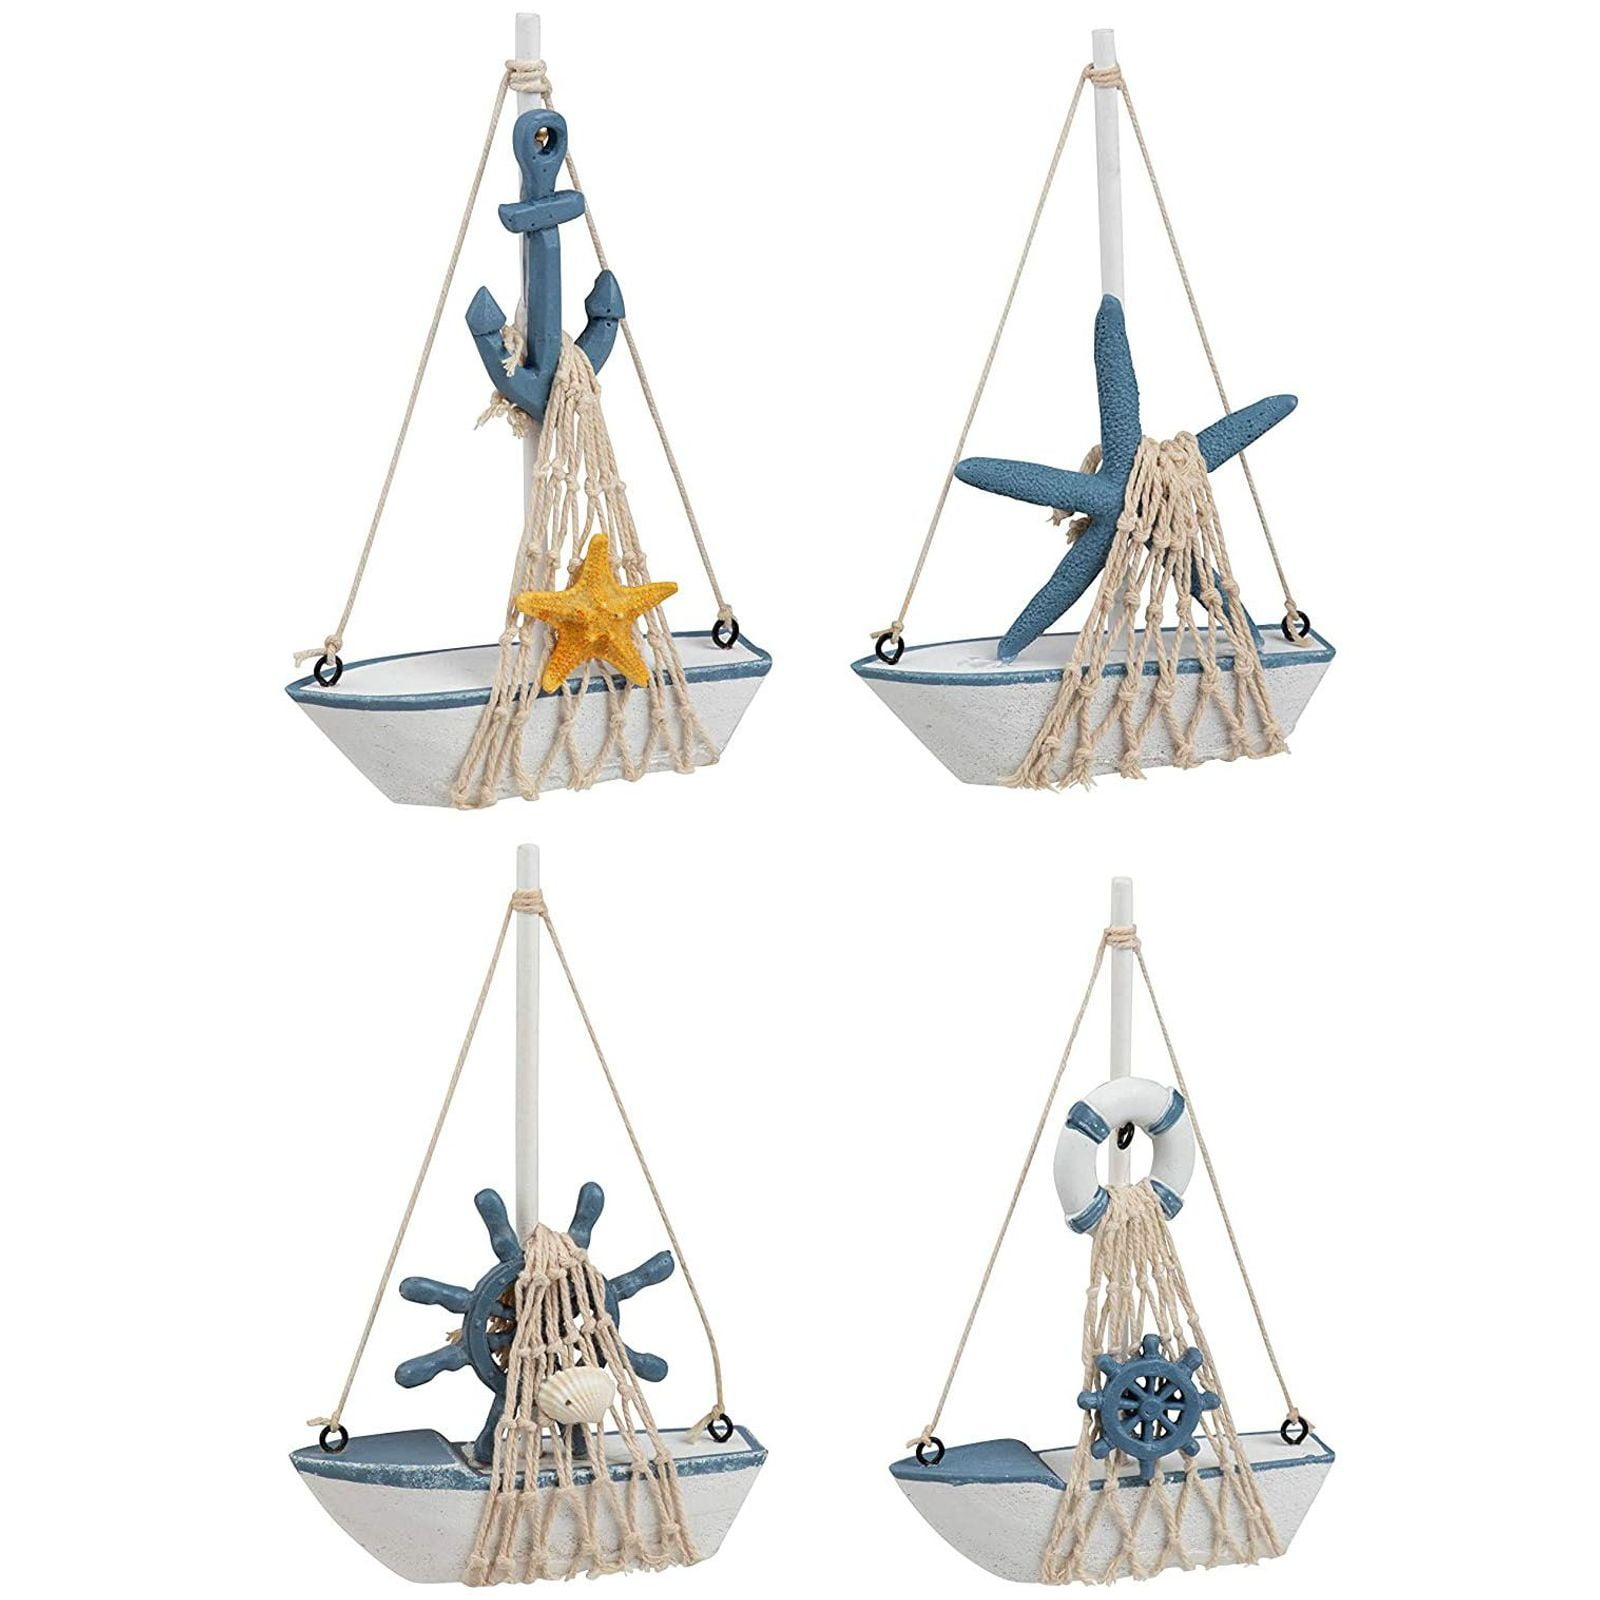 Metal statue ship boat anchor steering figurine home decoration decoration gift